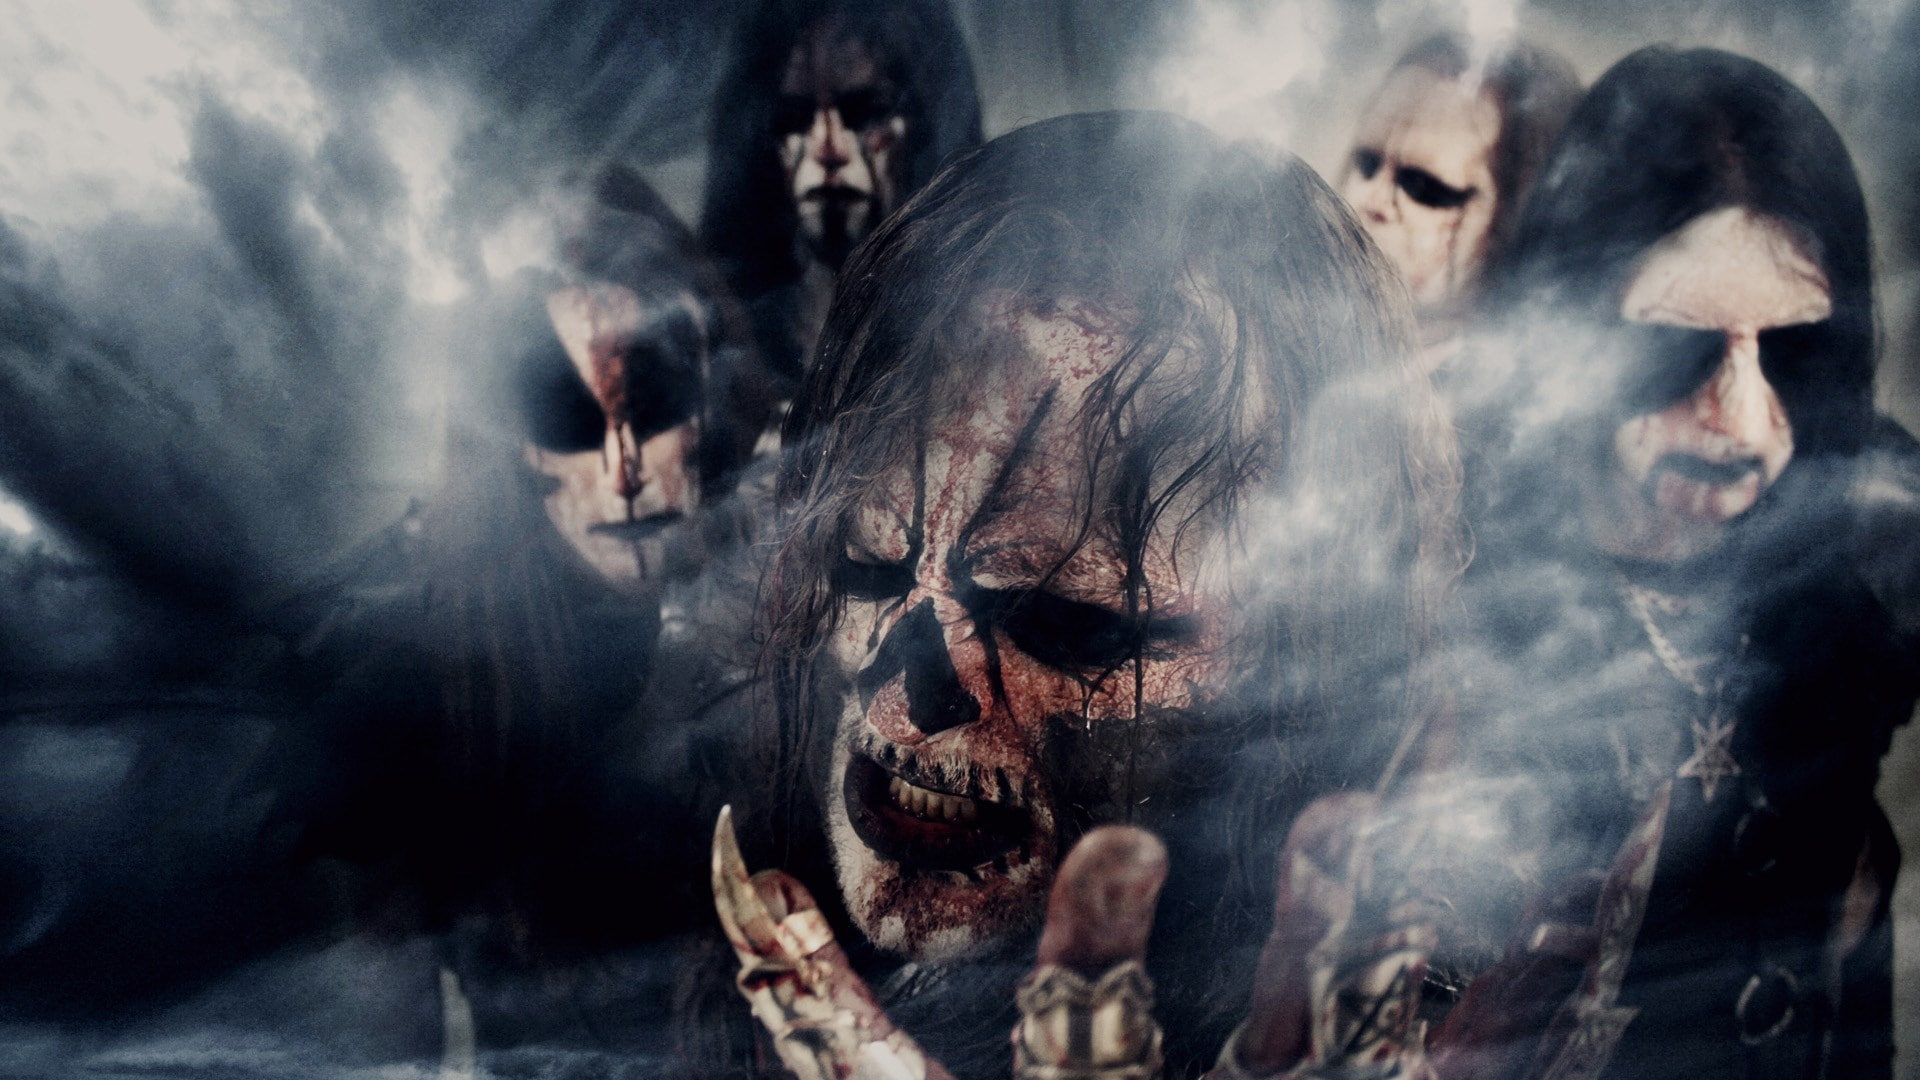 dark funeral, fear, horror, people, spooky, smoke - physical structure